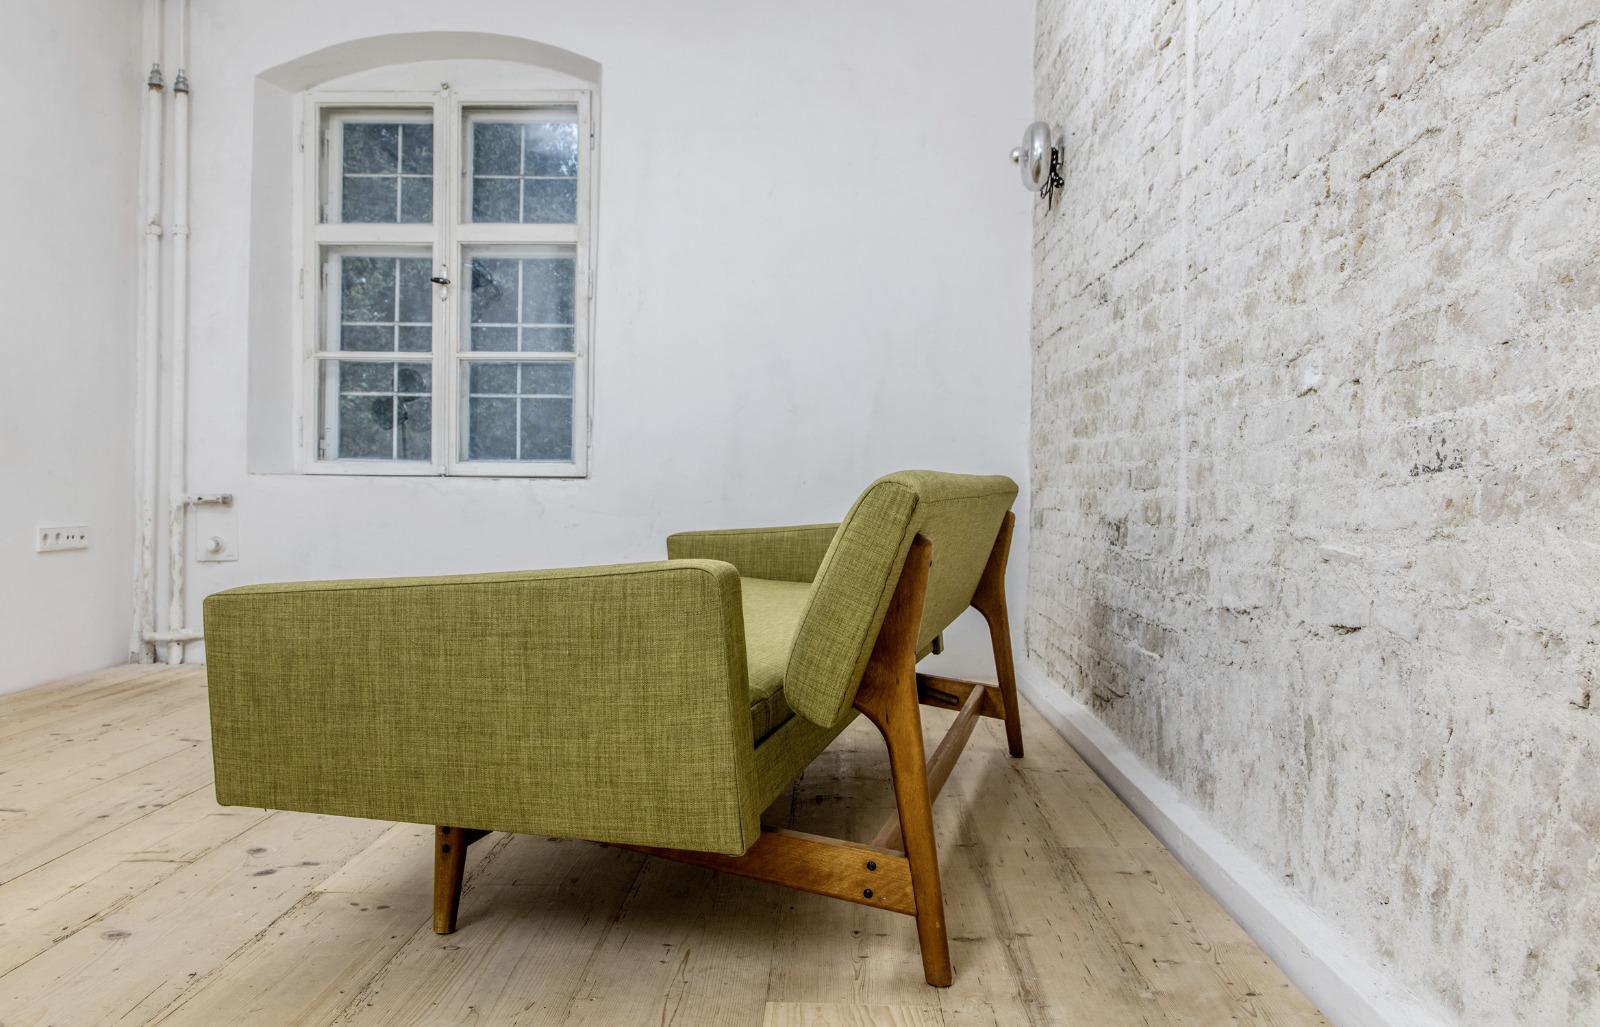 This very rare swedish Sofa has an straight elegant line with a frame of massiv teak. It was designed by well-known Swedish designer Karl-Erik Ekselius. Without effort, it can be converted into an daybed. Original woolen cushions and teak frame in